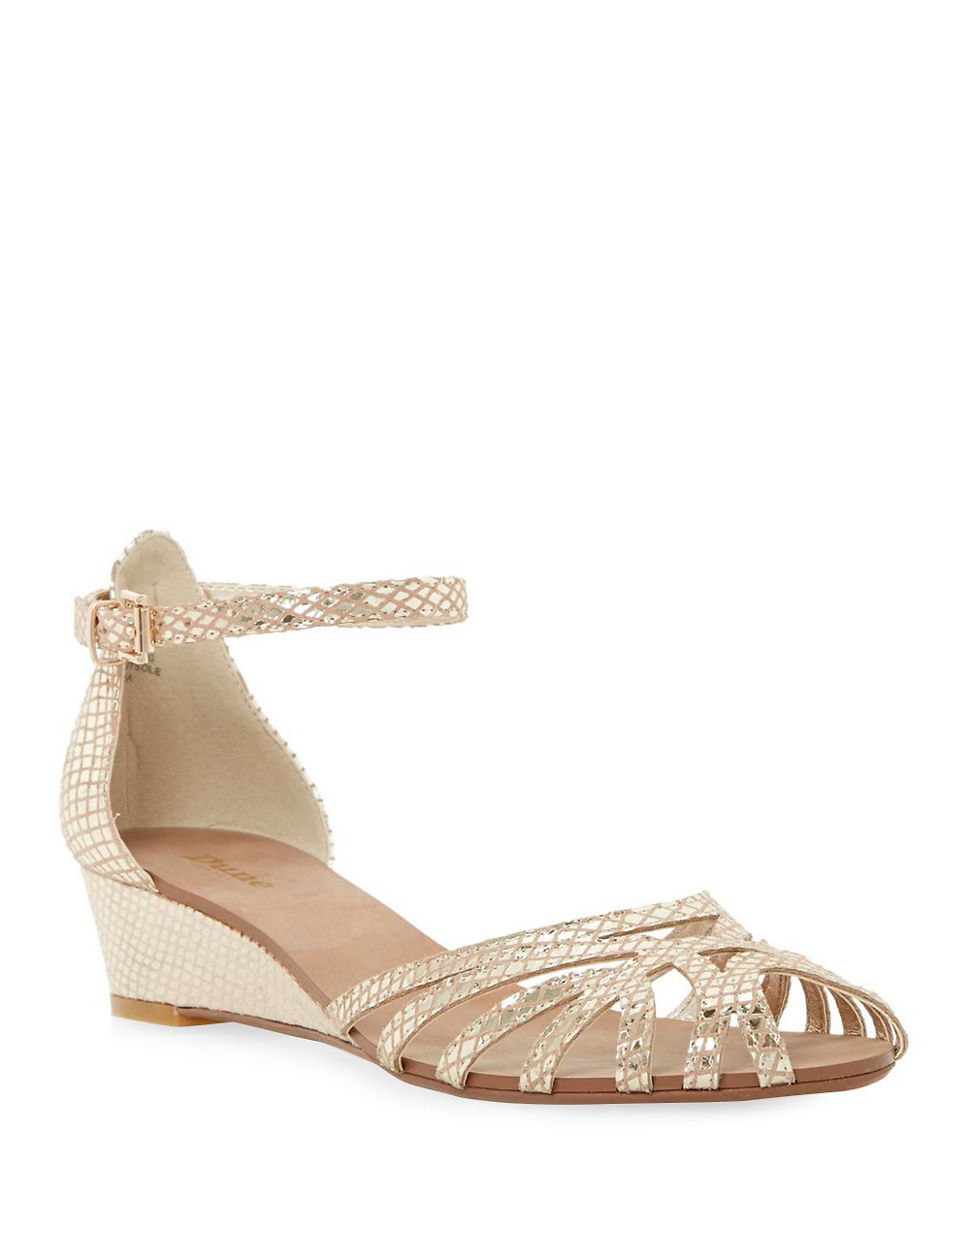 Dune Knightly Leather Low Wedge Sandals in Natural | Lyst